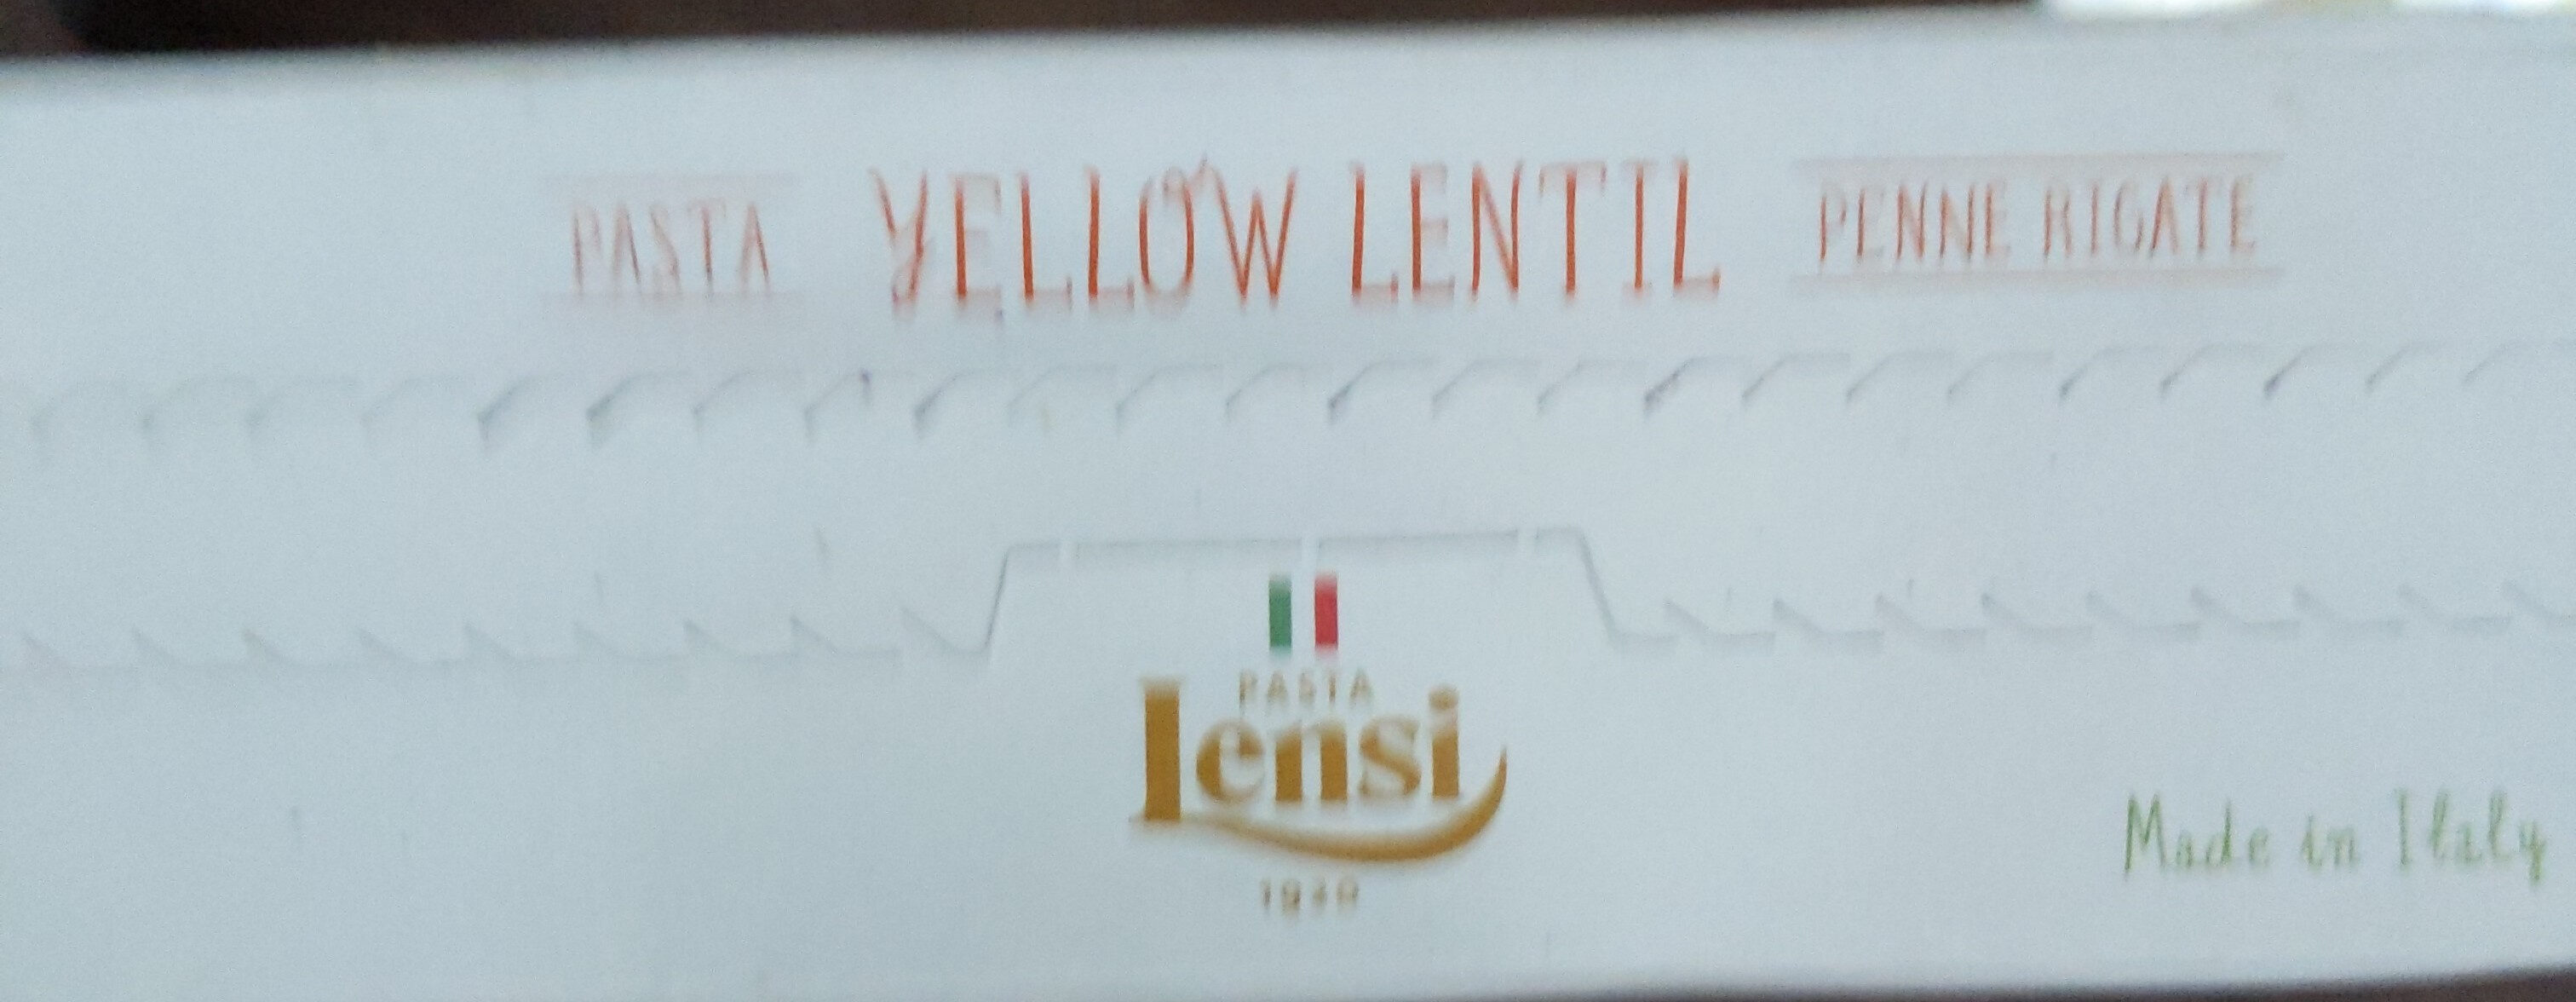 Yellow Lentil Penne Rigate - Product